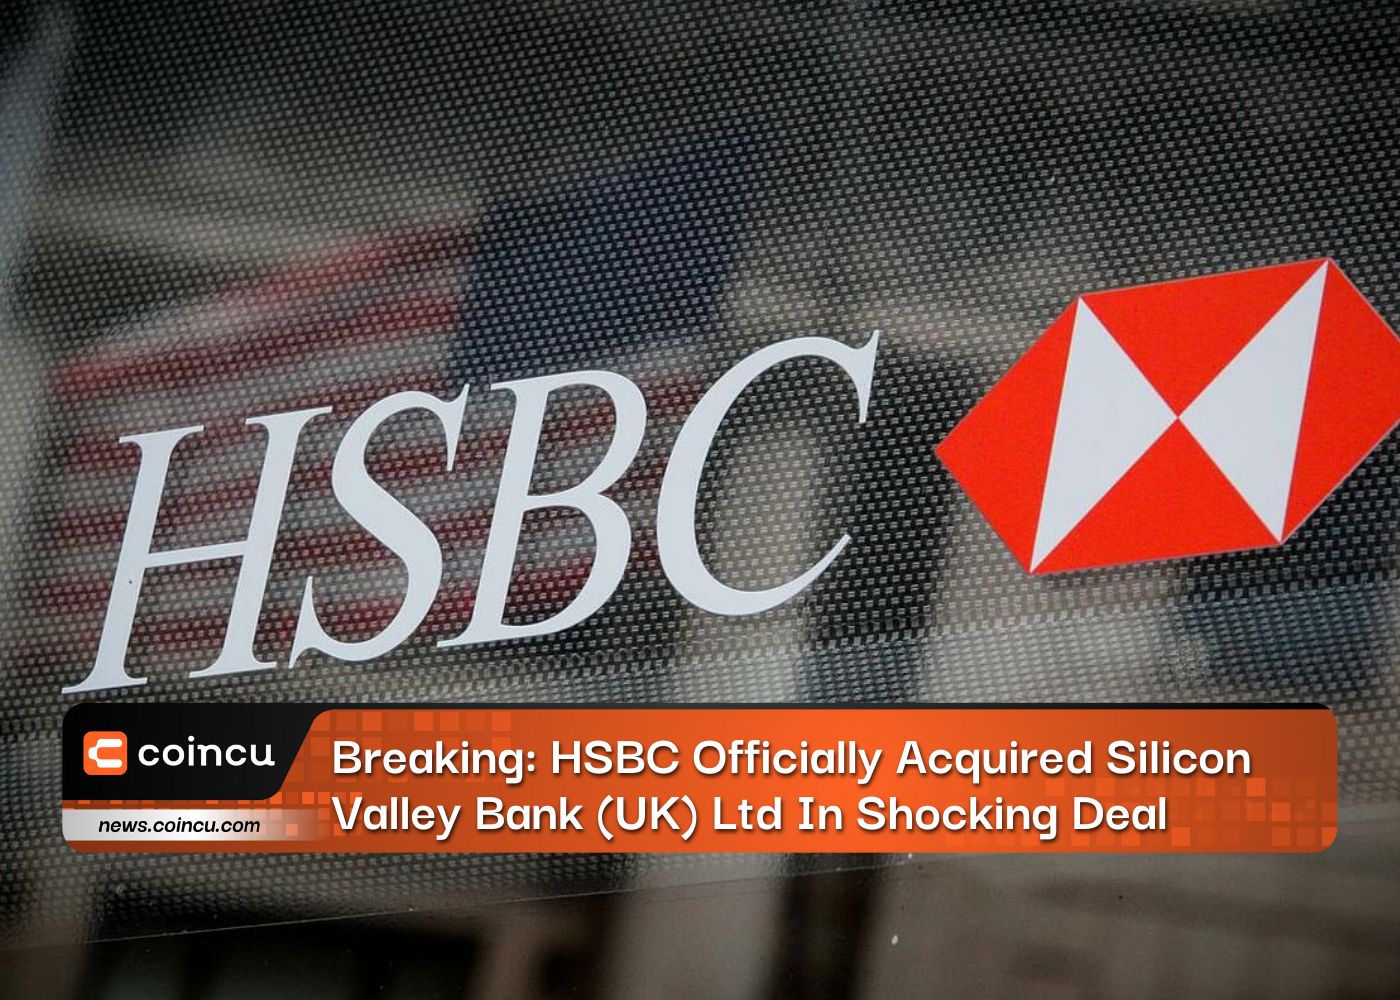 Breaking: HSBC Officially Acquired Silicon Valley Bank (UK) Ltd In Shocking Deal